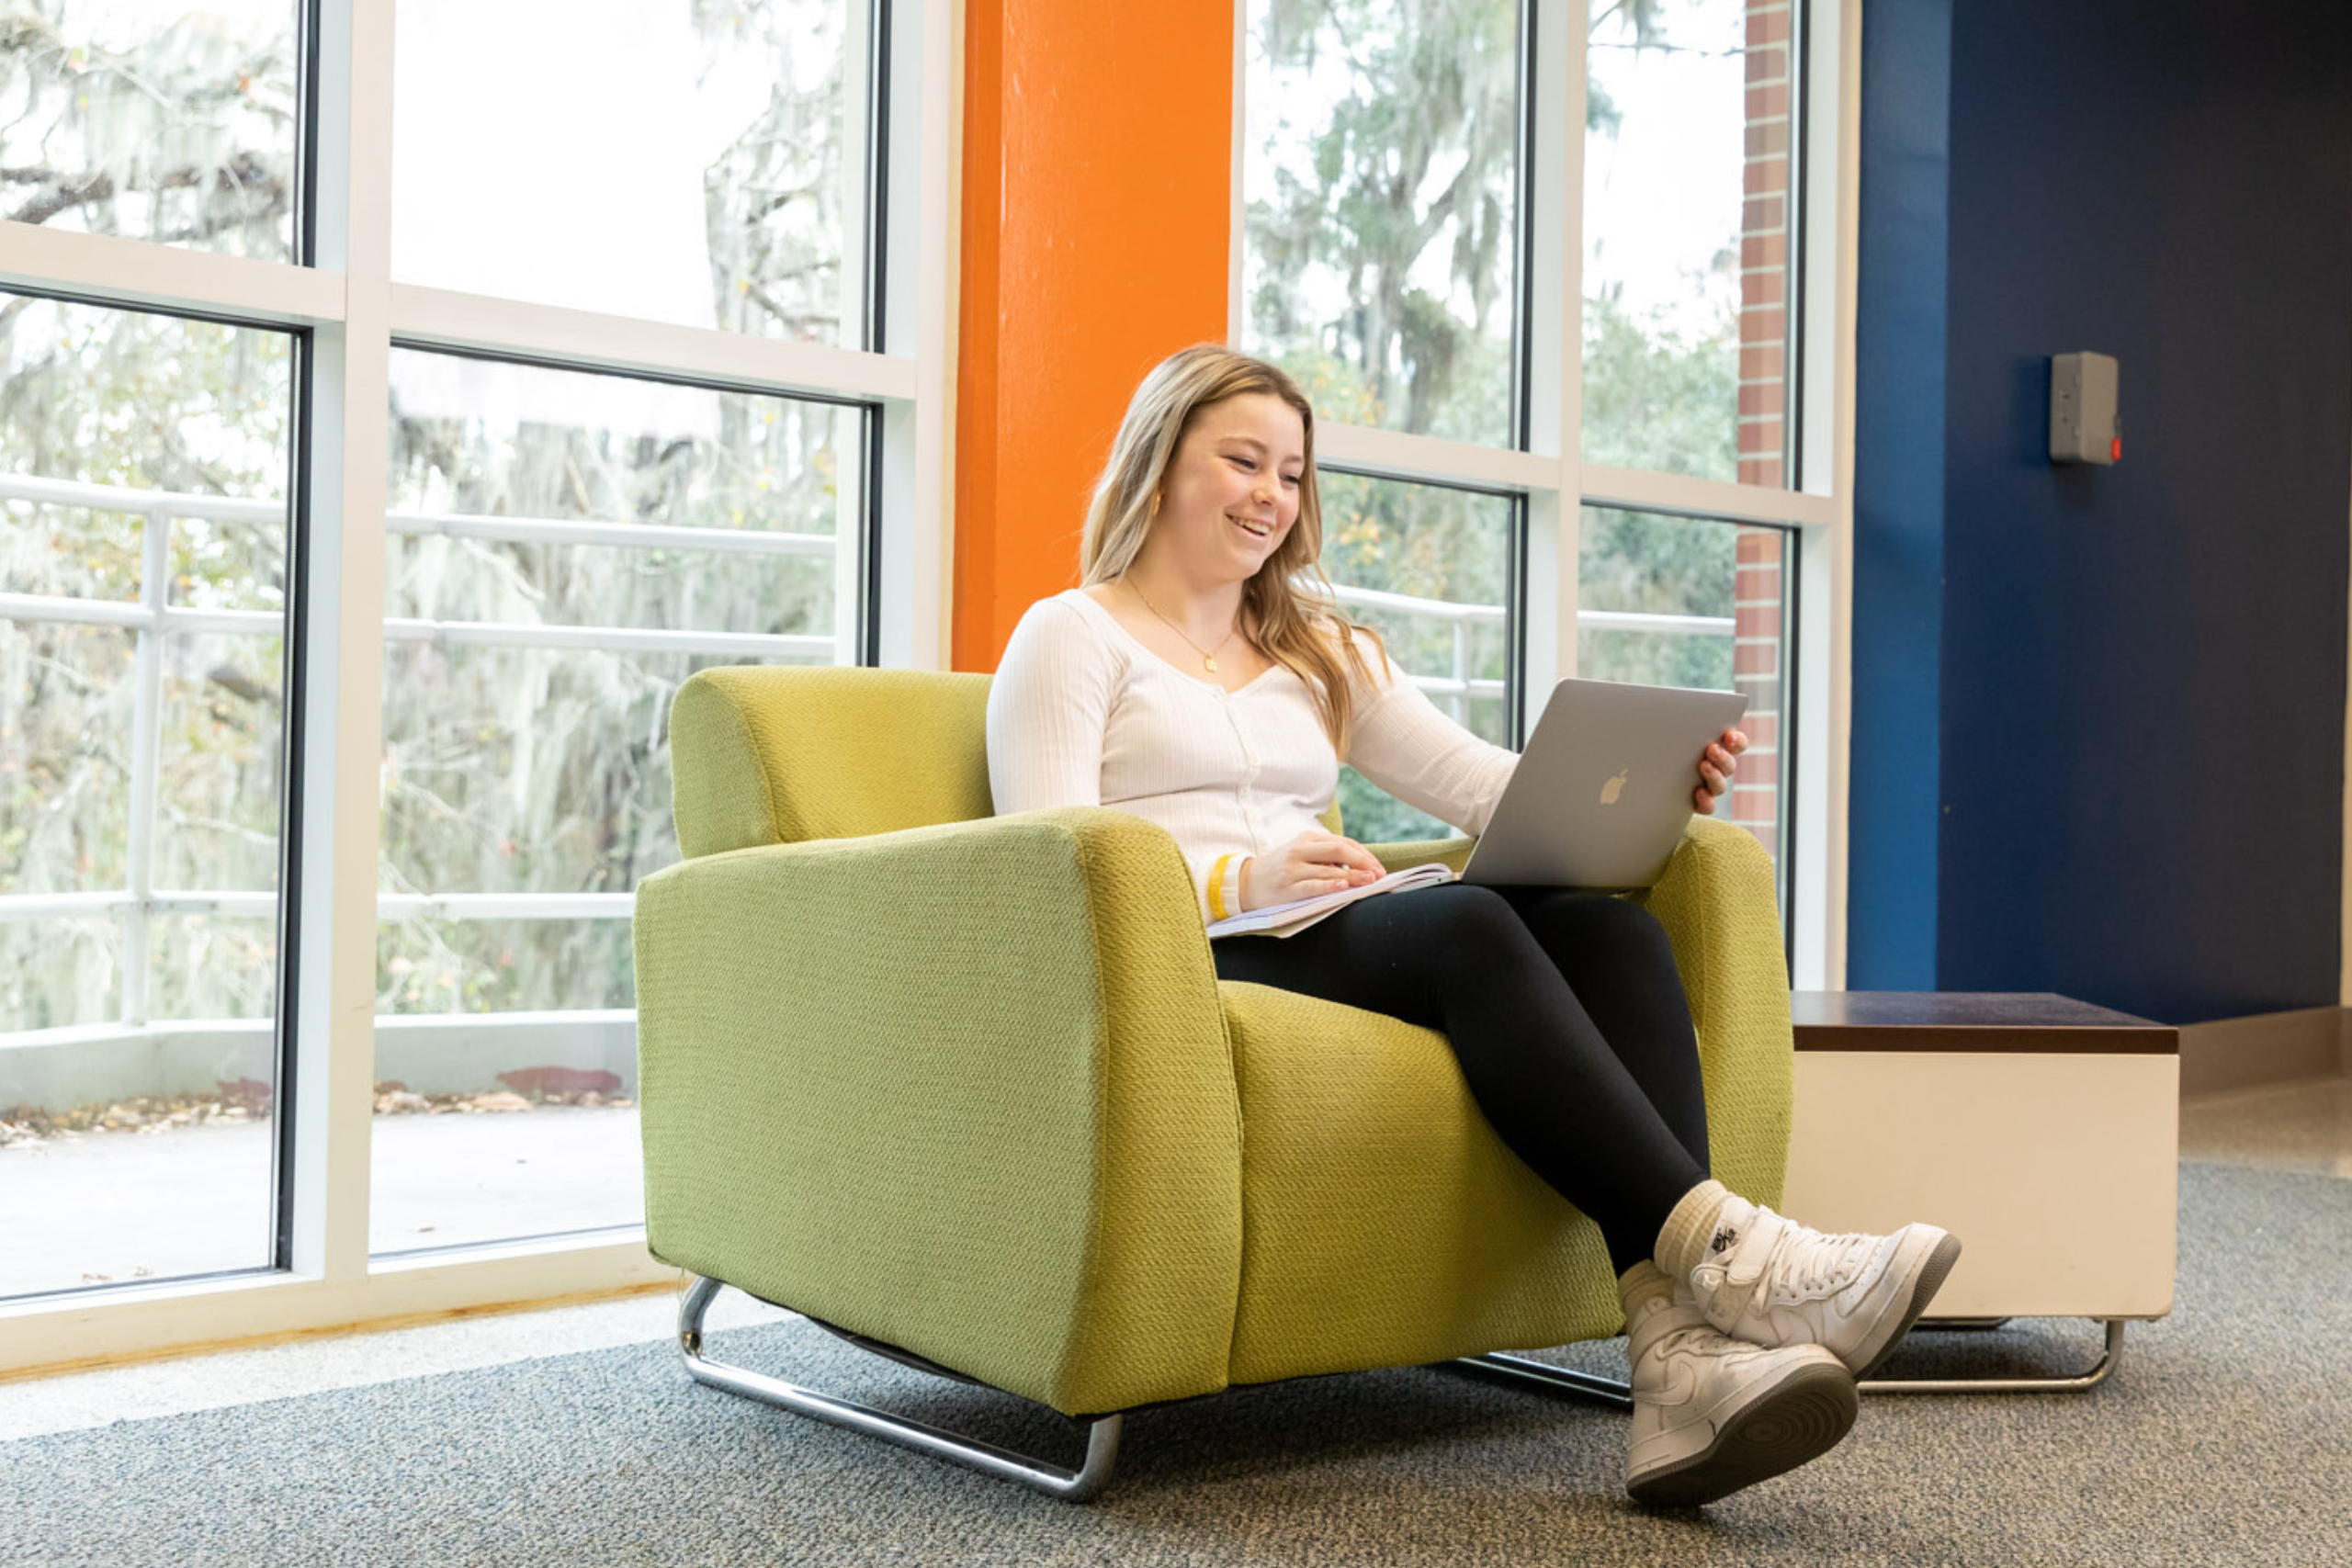 A blonde female student wears a white shirt, black leggings, and white sneakers while smiling and studying in her common room.